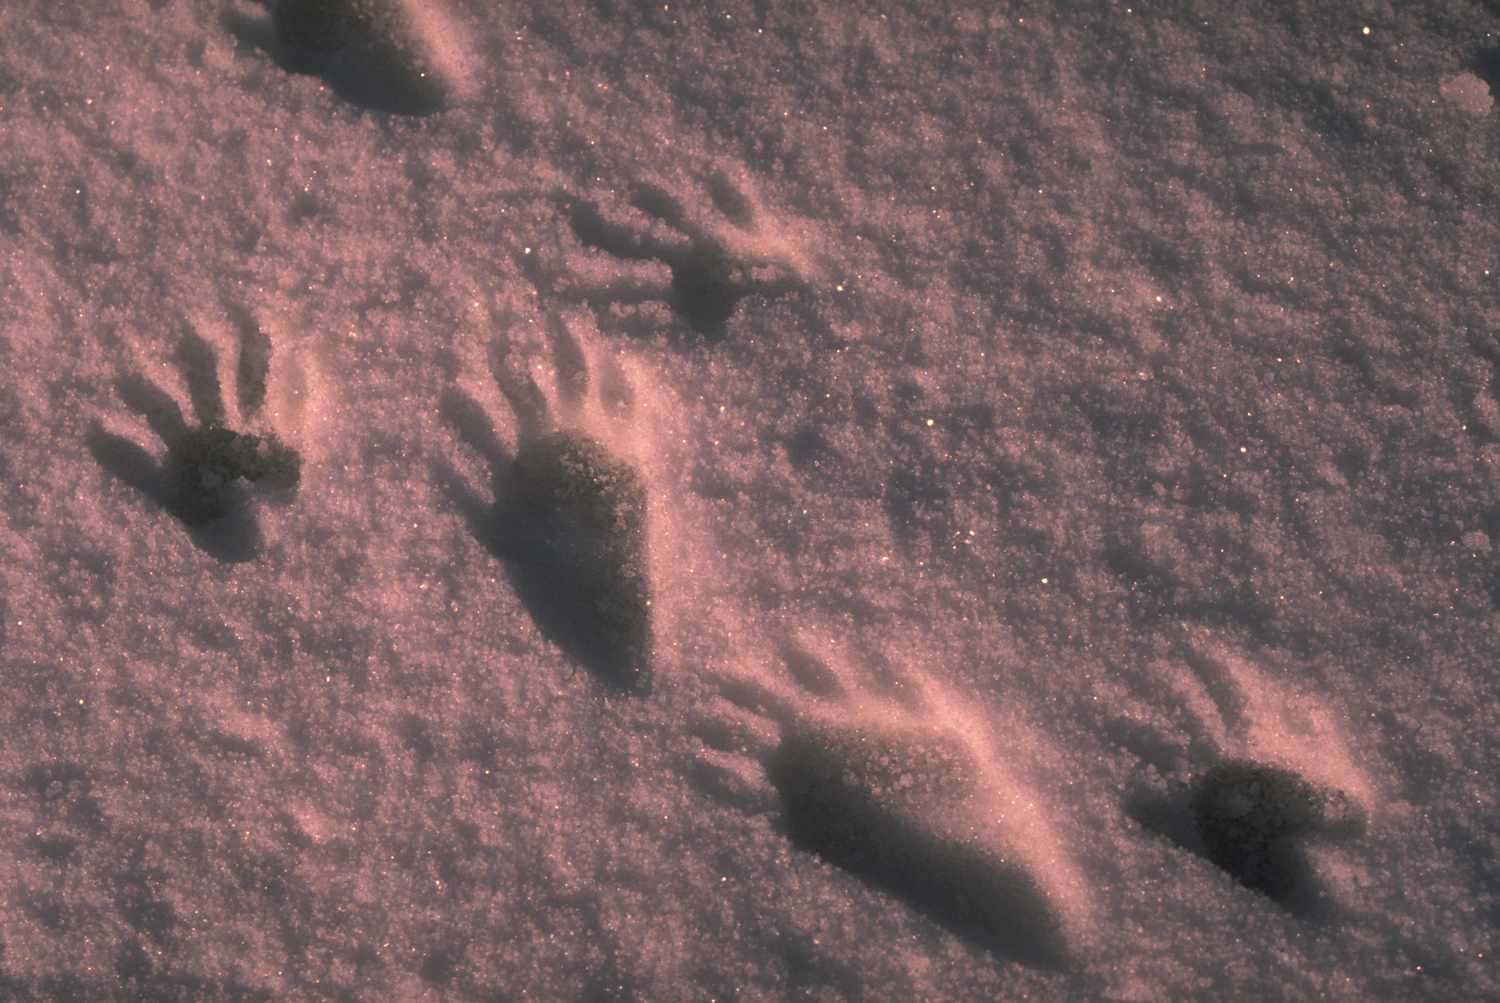 Distinct raccoon tracks in fresh snow, two smaller claw prints in front and two larger ones in back.